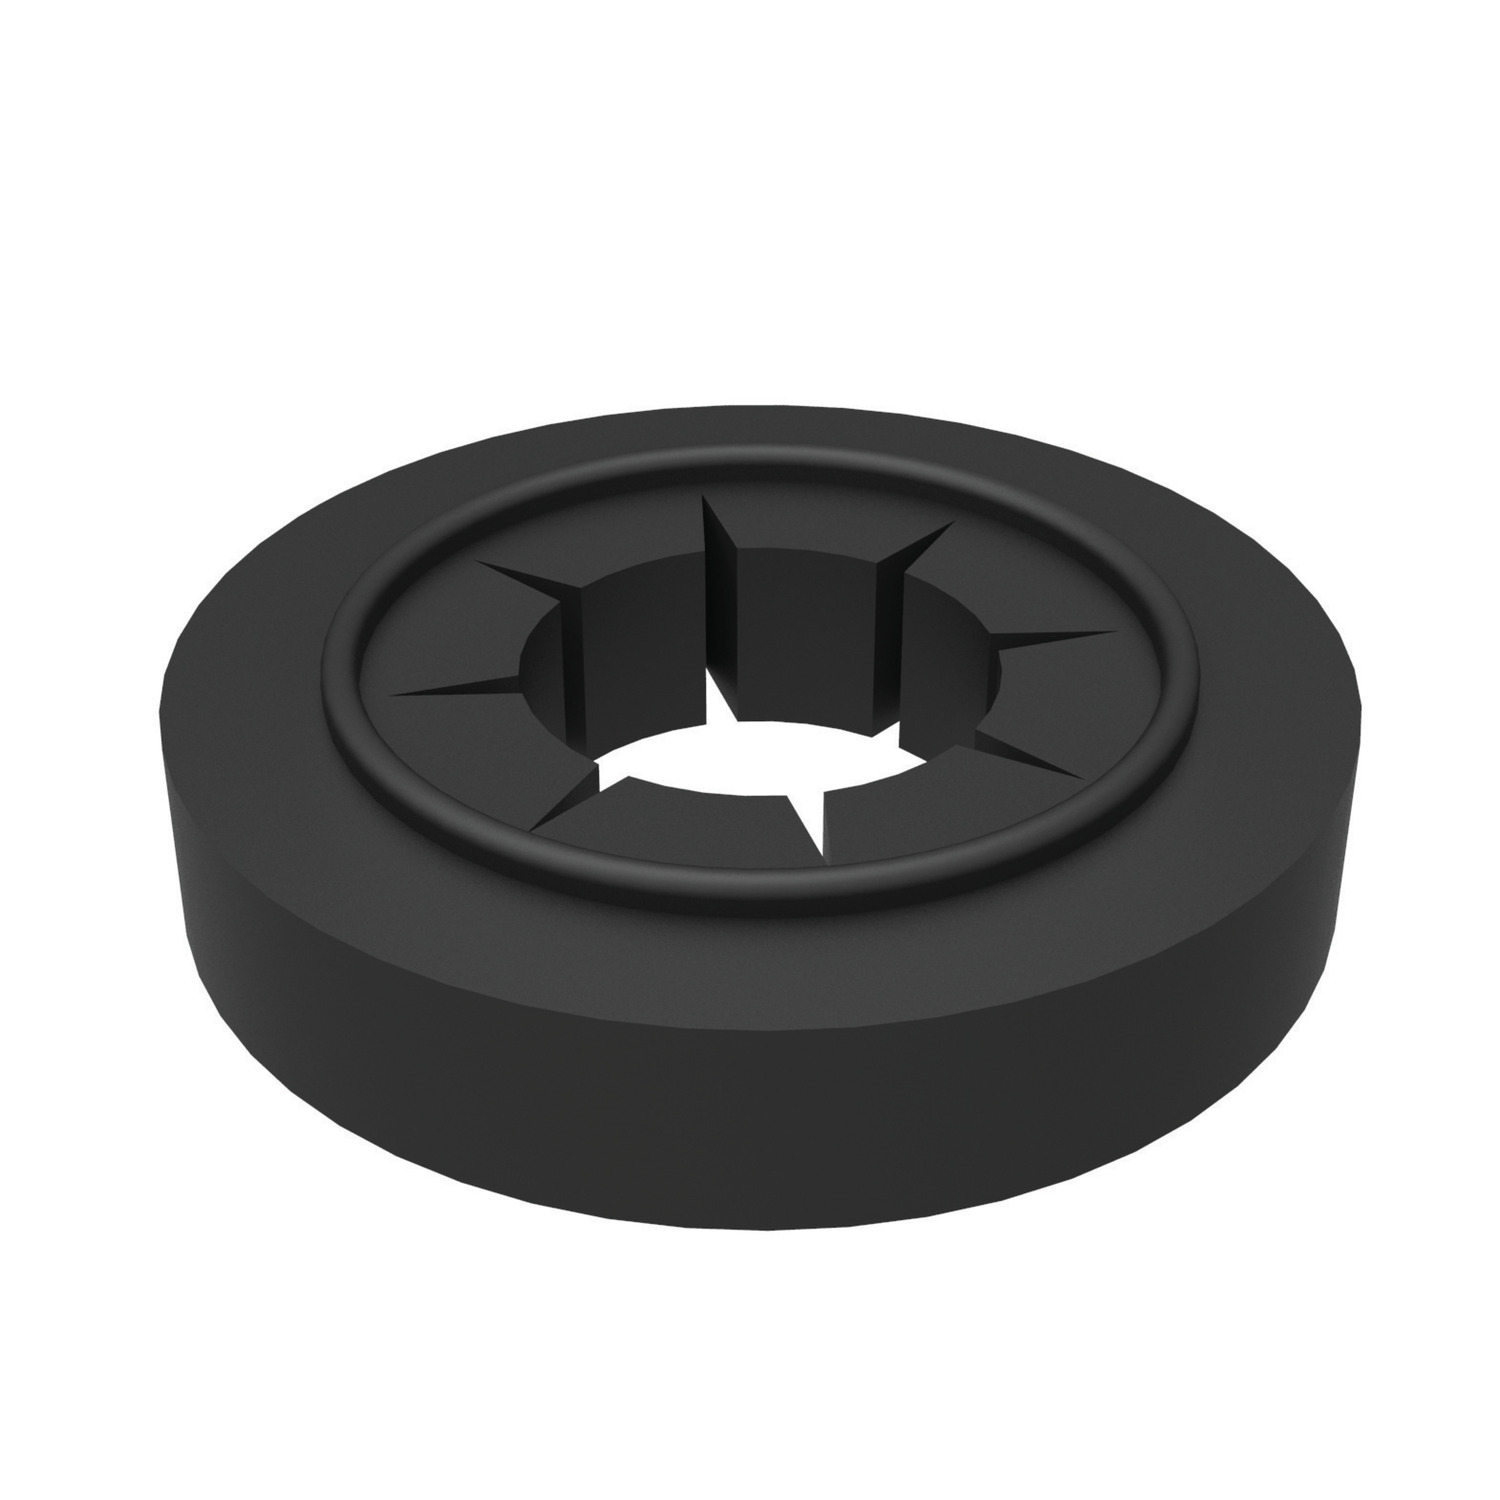 Anti-vibration Rings Anti-vibration rings with internal star design. Rubber hardness - 65 Shore A. For more technical information, please visit our product page.